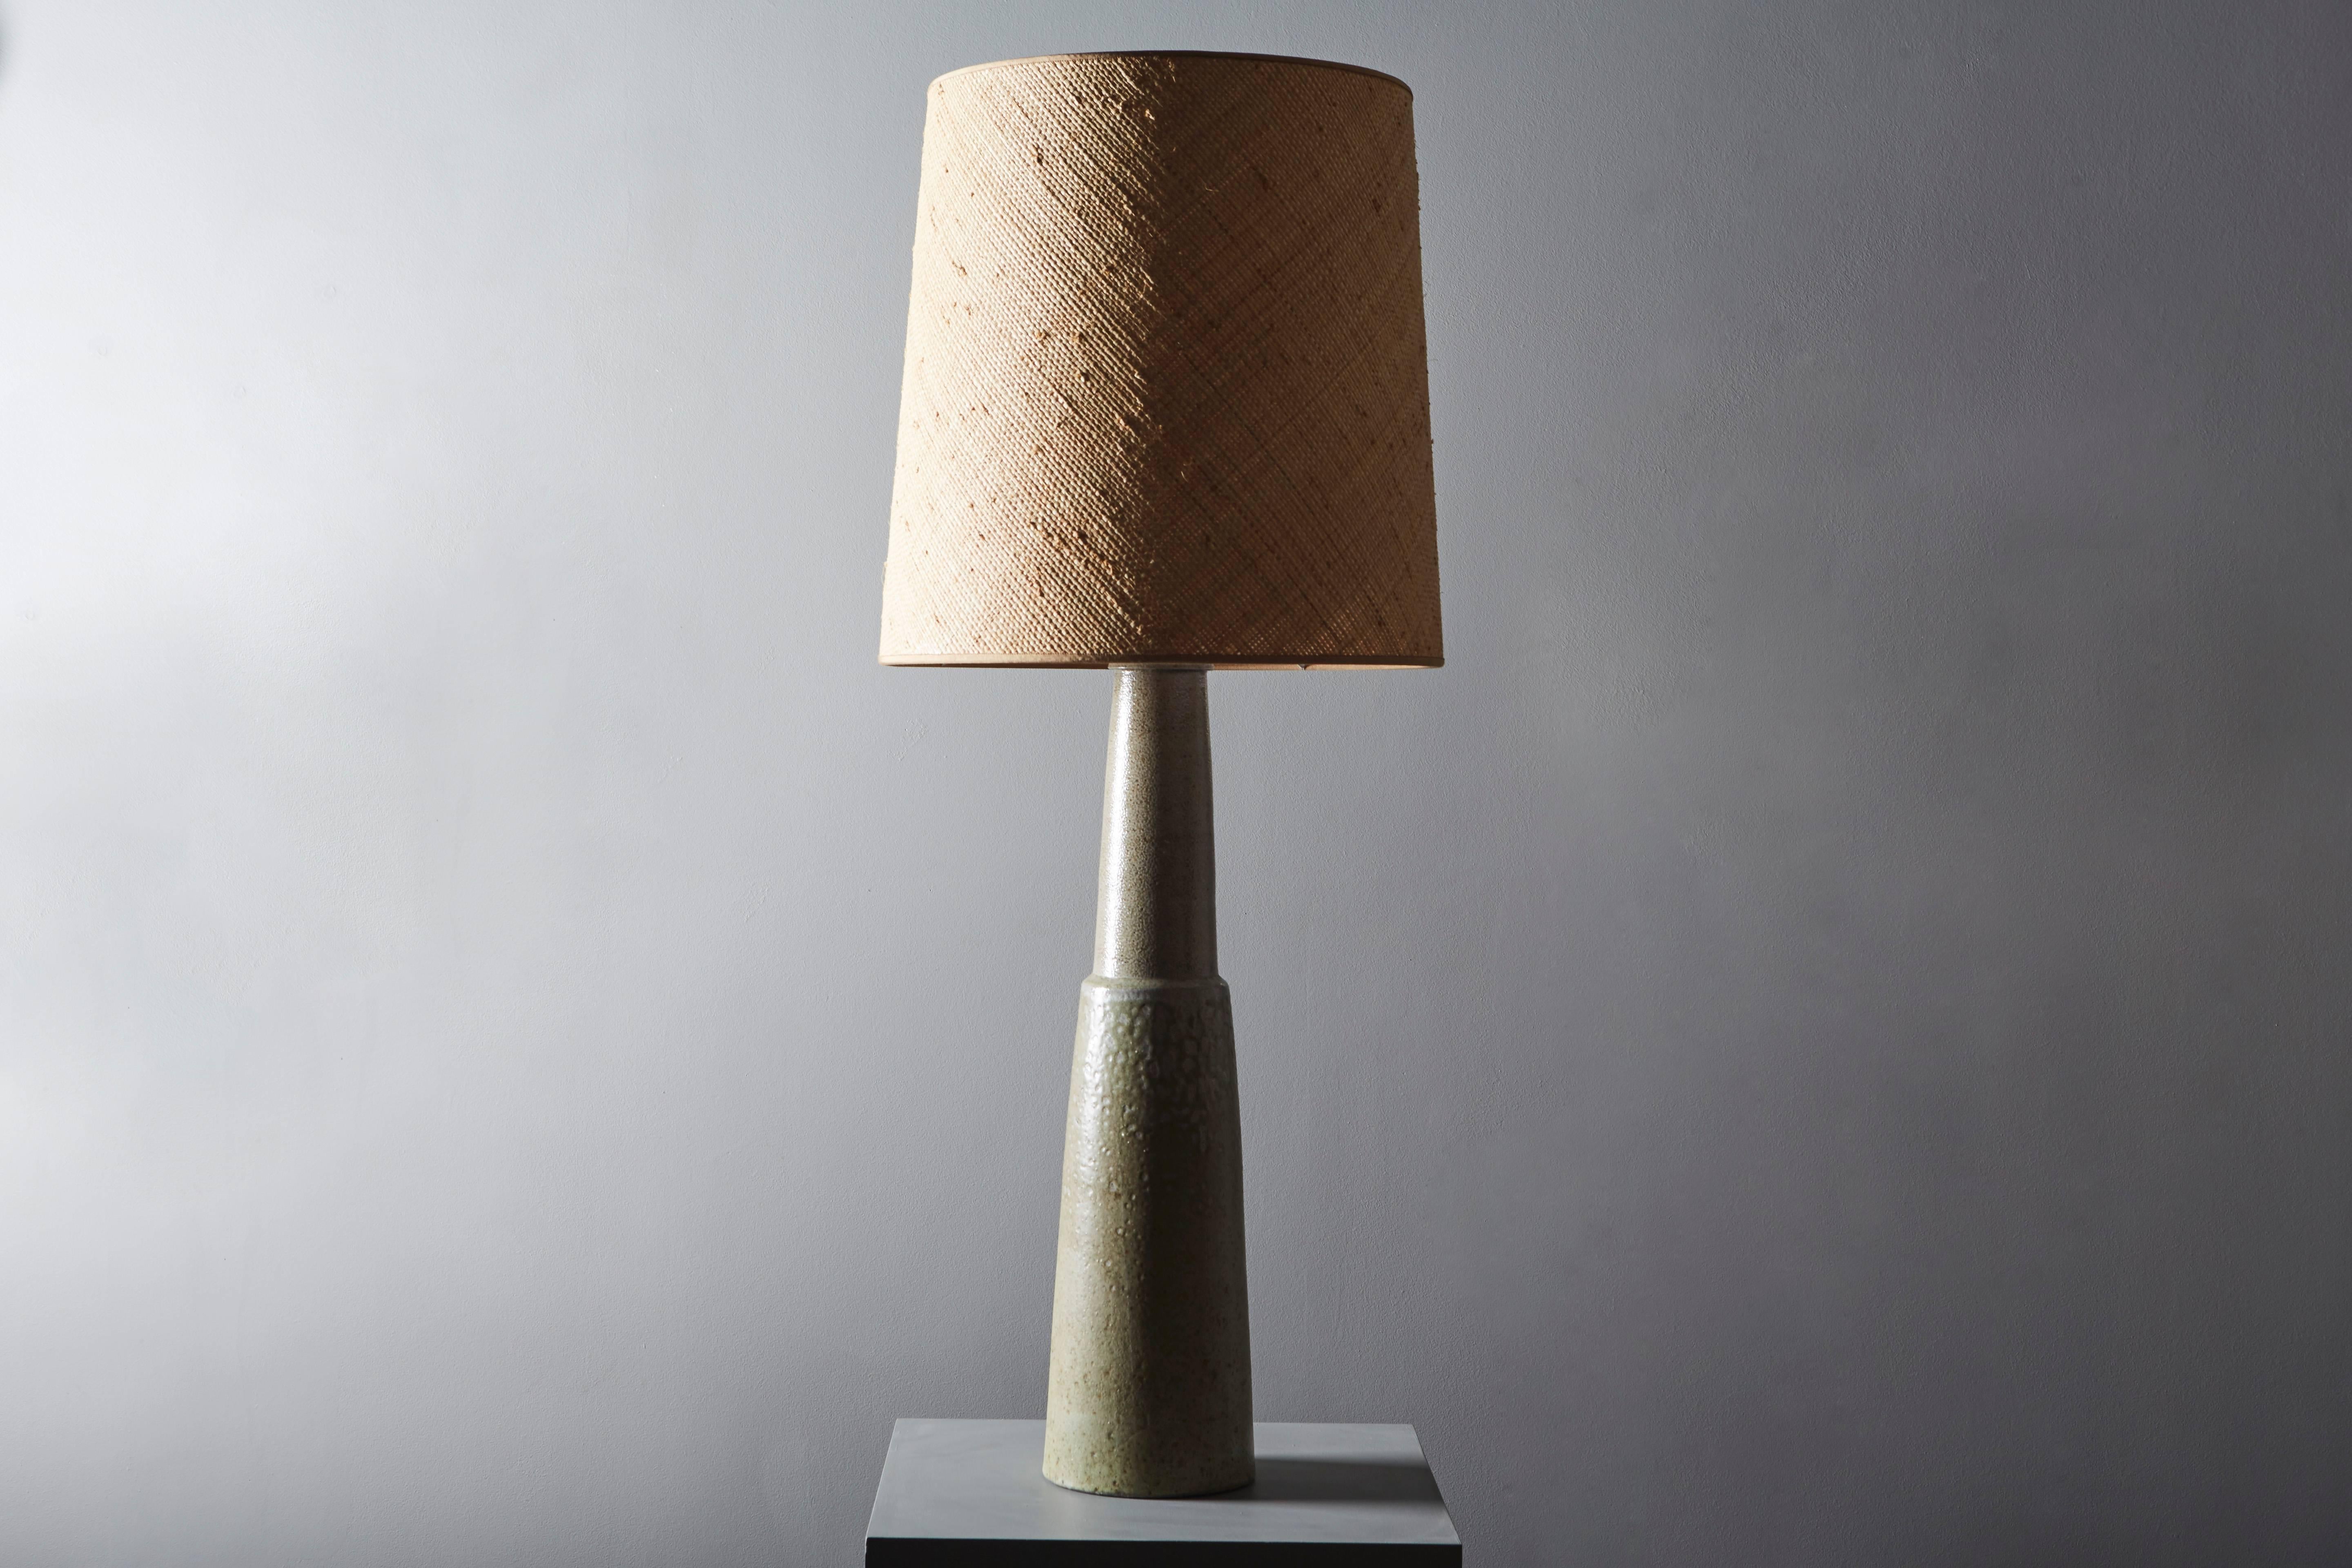 Enameled sandstone lamp, in natural colors, with texture effects. The base is truncated-cone shaped.

The shade is new, made by Maison Capeline, Paris.

Danish work by Kähler, circa 1950.

Measures: Lamp base only is 23.6 in high and 6.7 in